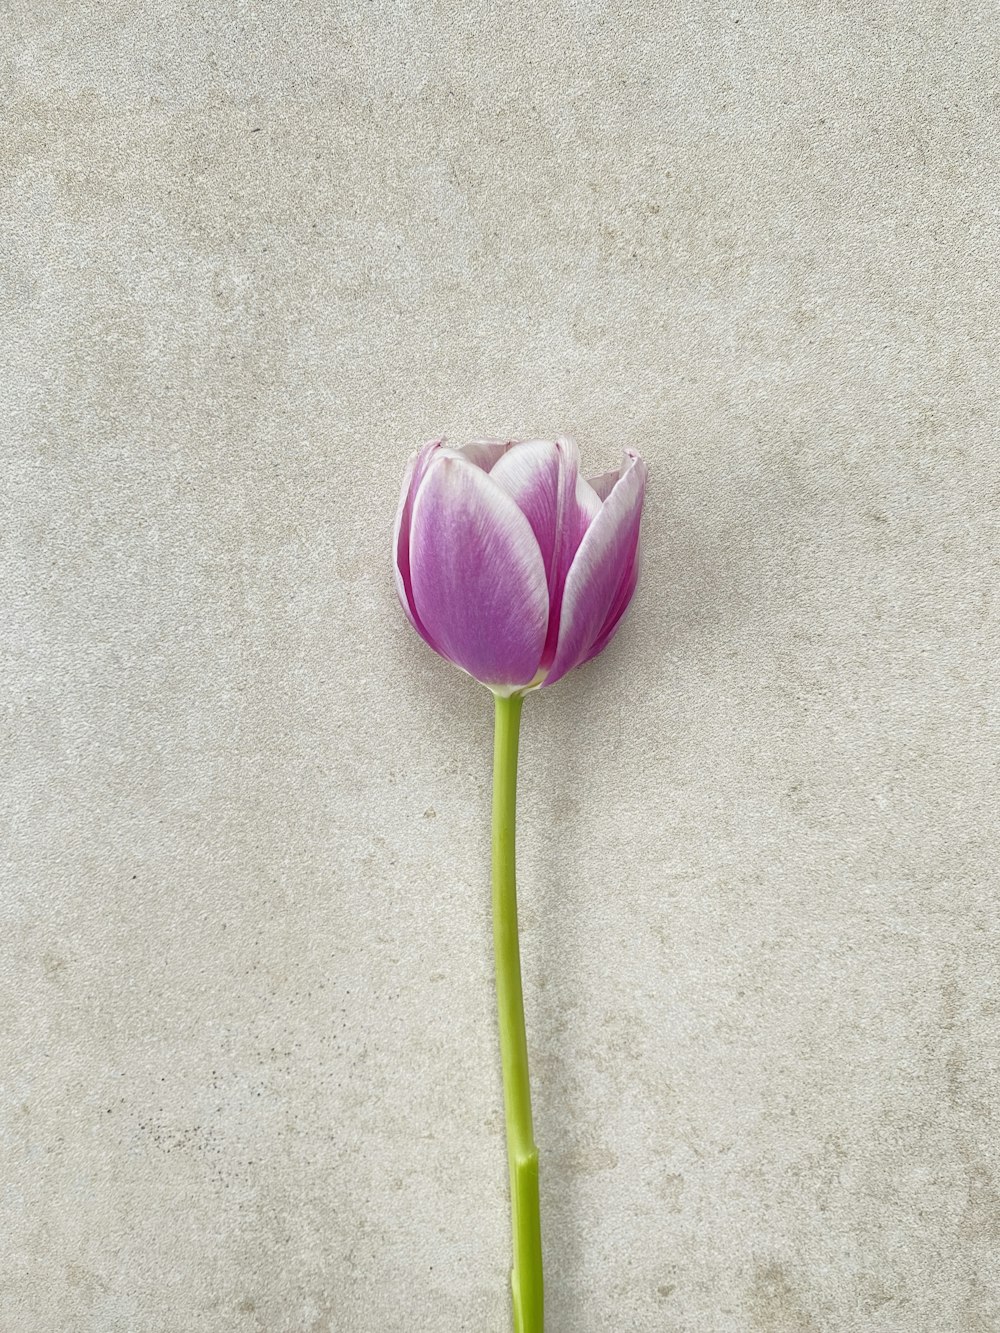 a single purple flower on a white background